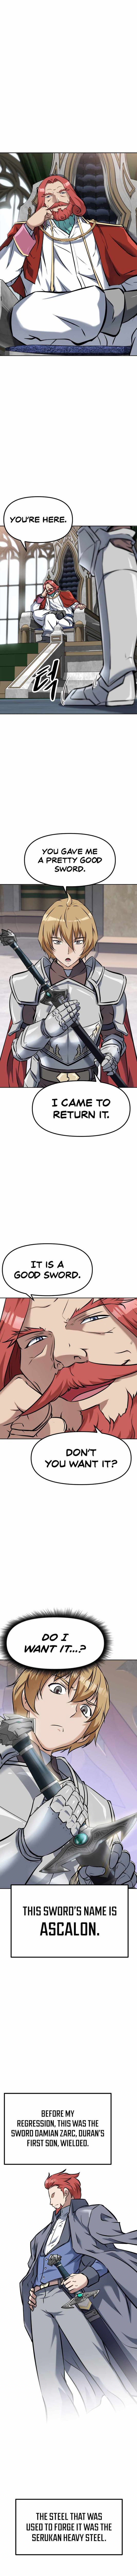 The Return Of The Prodigious Swordmaster - Page 3